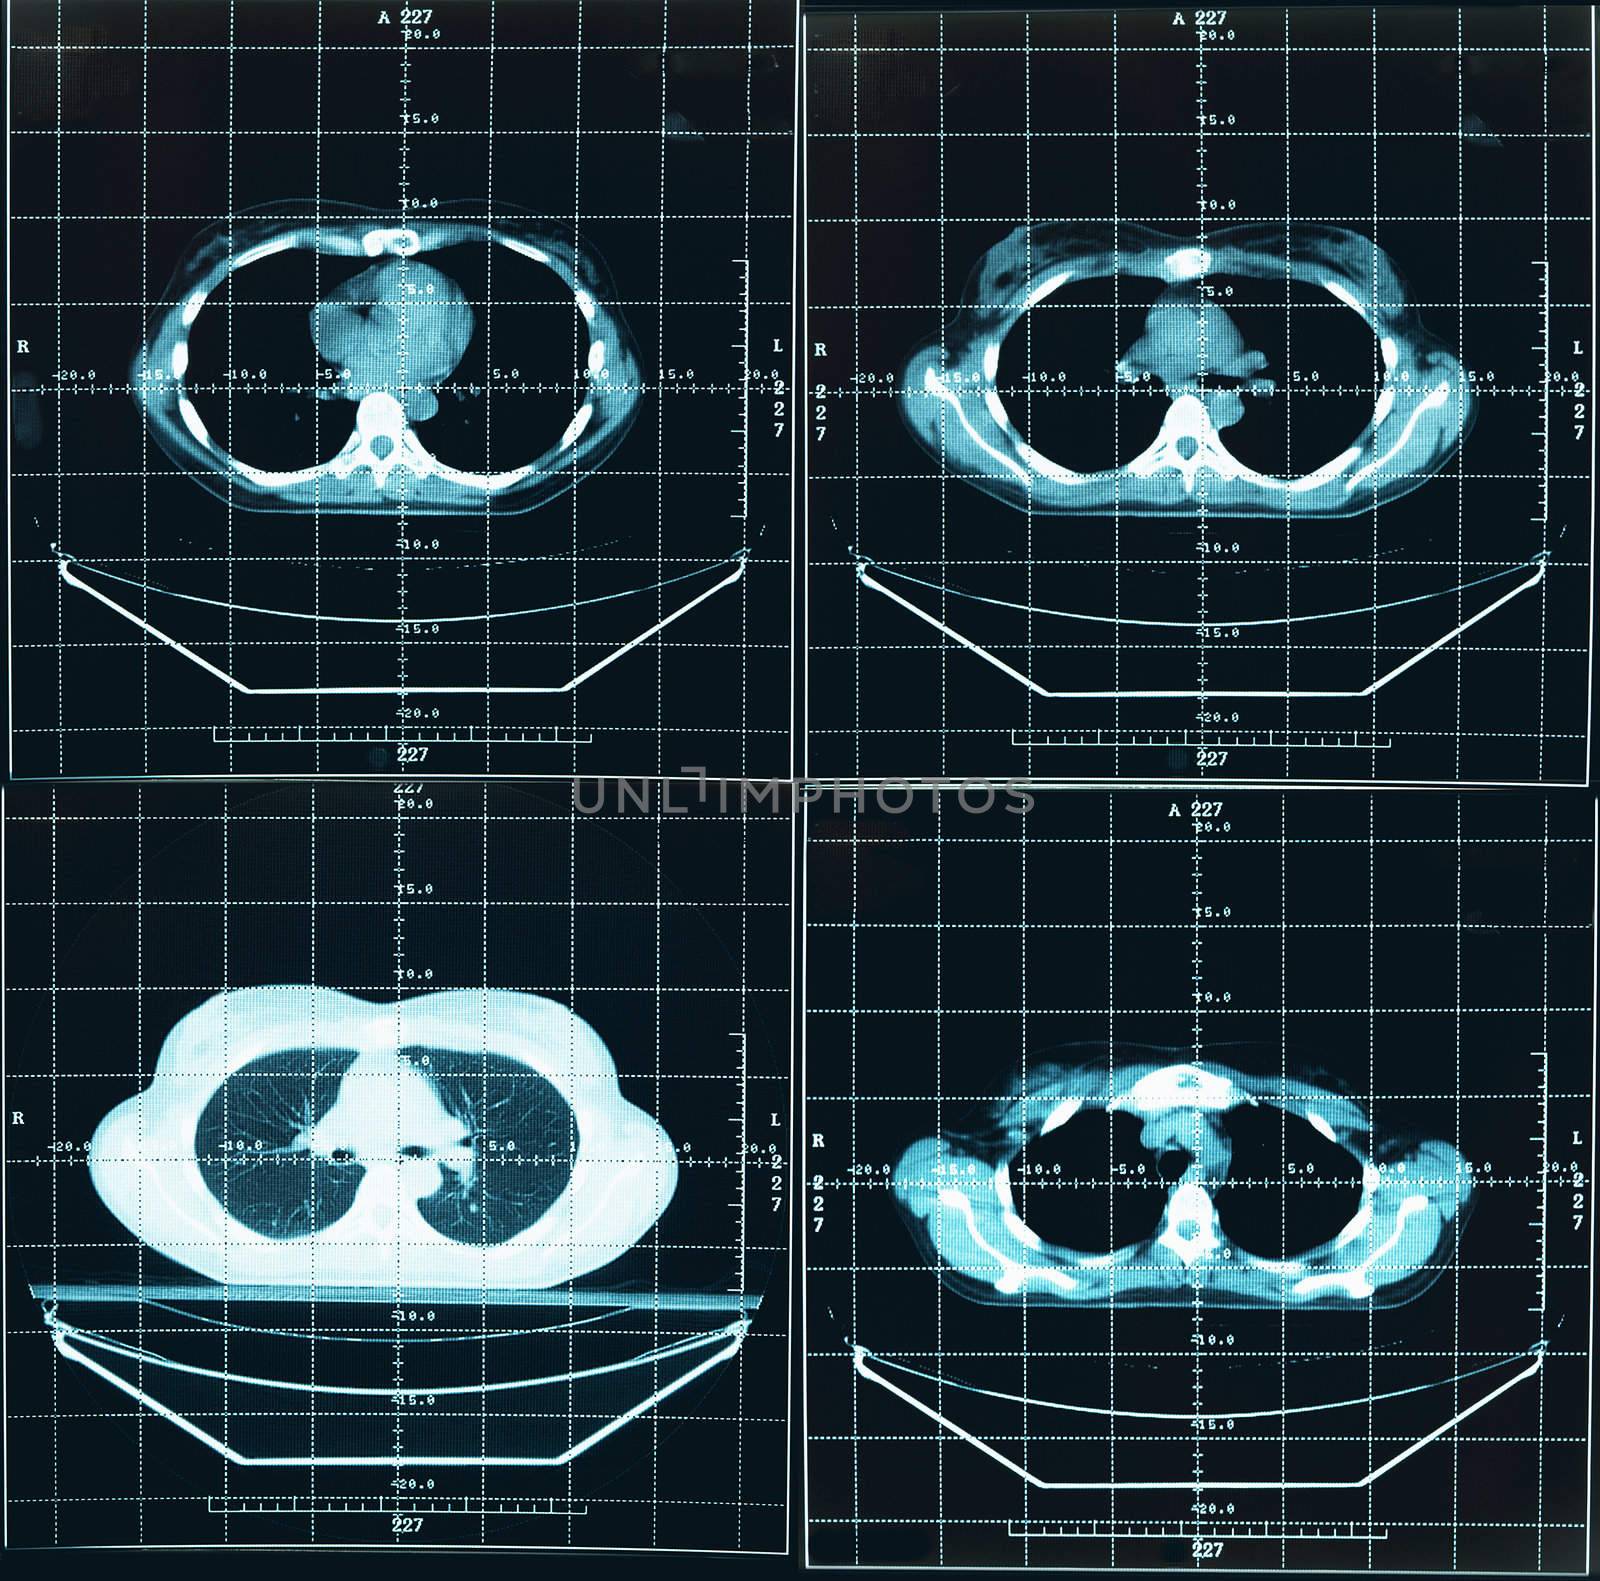 Four images - tomography of human thorax